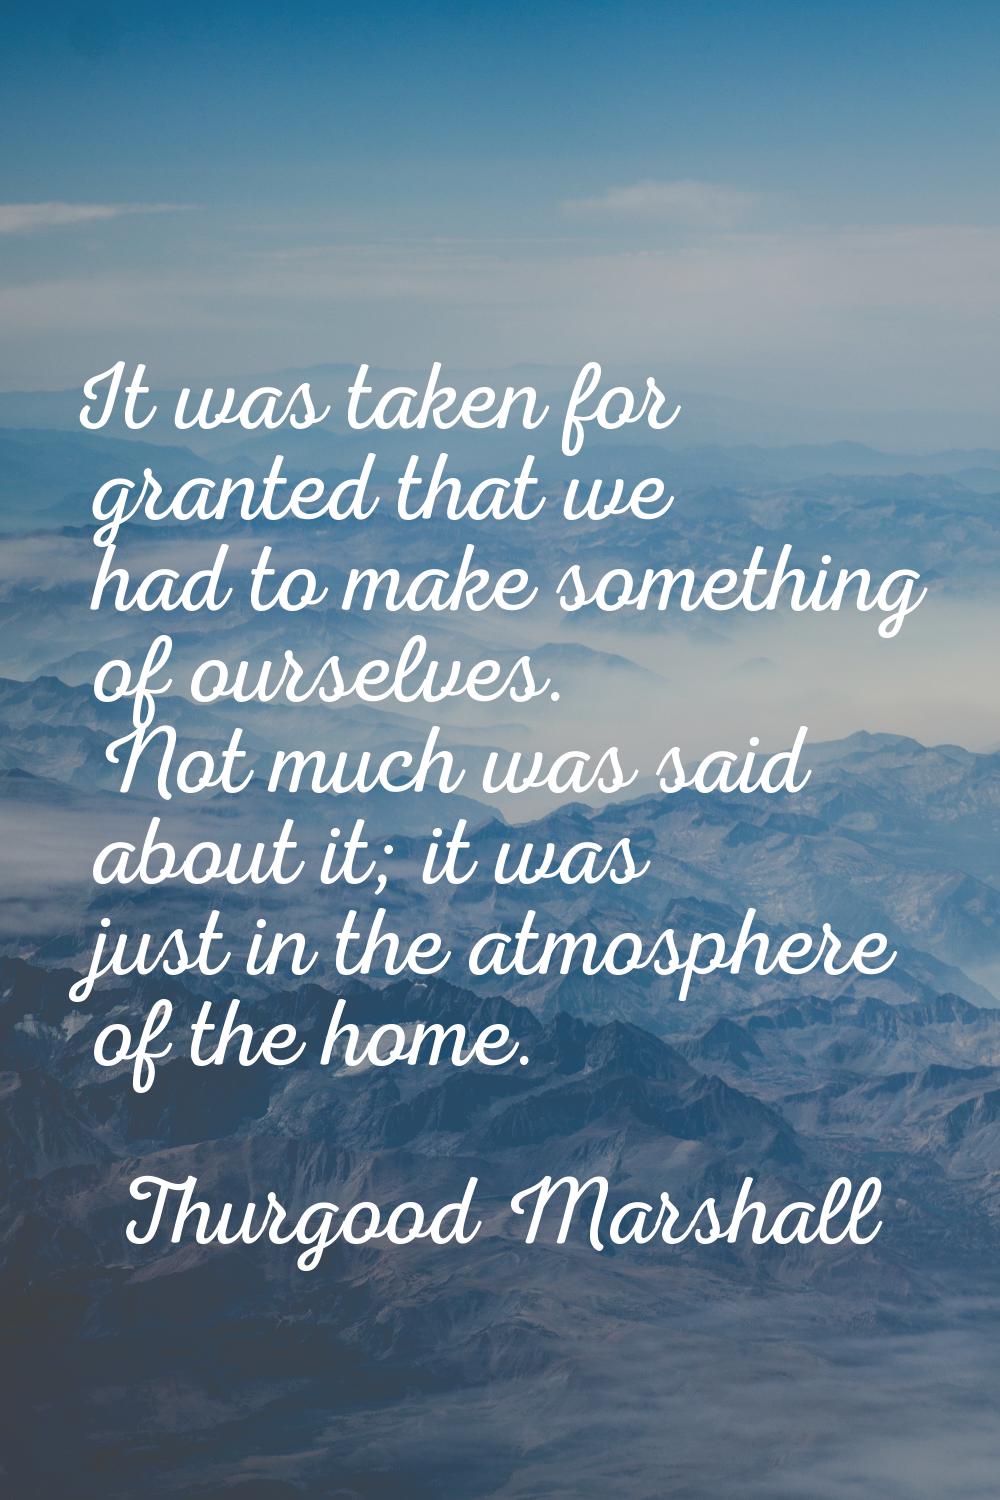 It was taken for granted that we had to make something of ourselves. Not much was said about it; it